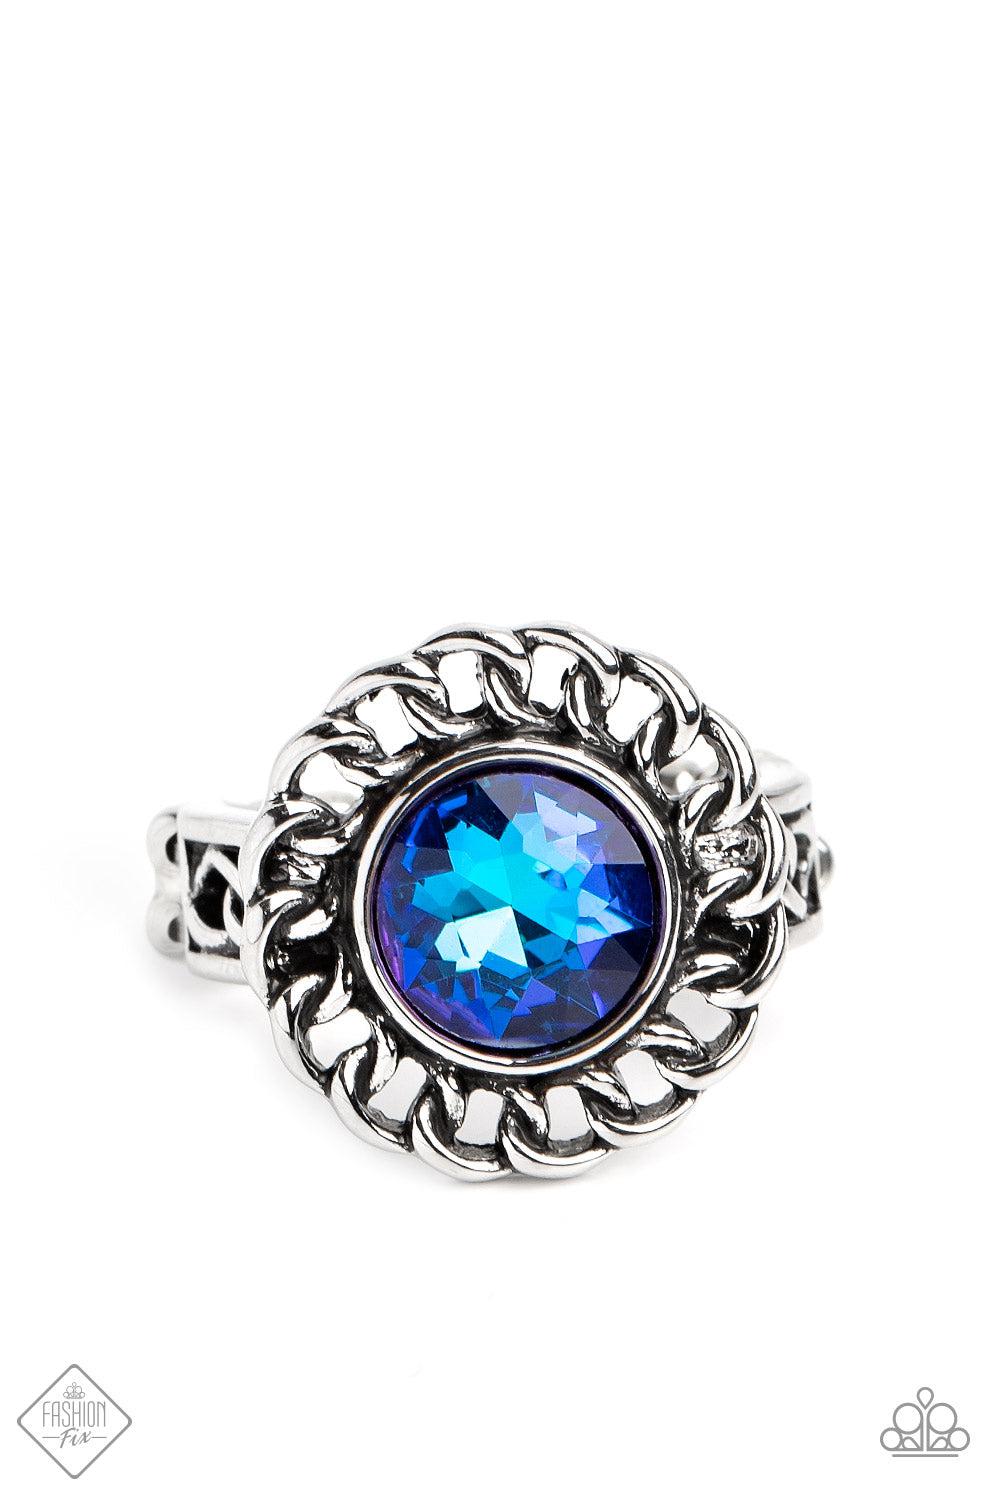 Round Table Runway Blue Rhinestone Ring - Paparazzi Accessories- lightbox - CarasShop.com - $5 Jewelry by Cara Jewels